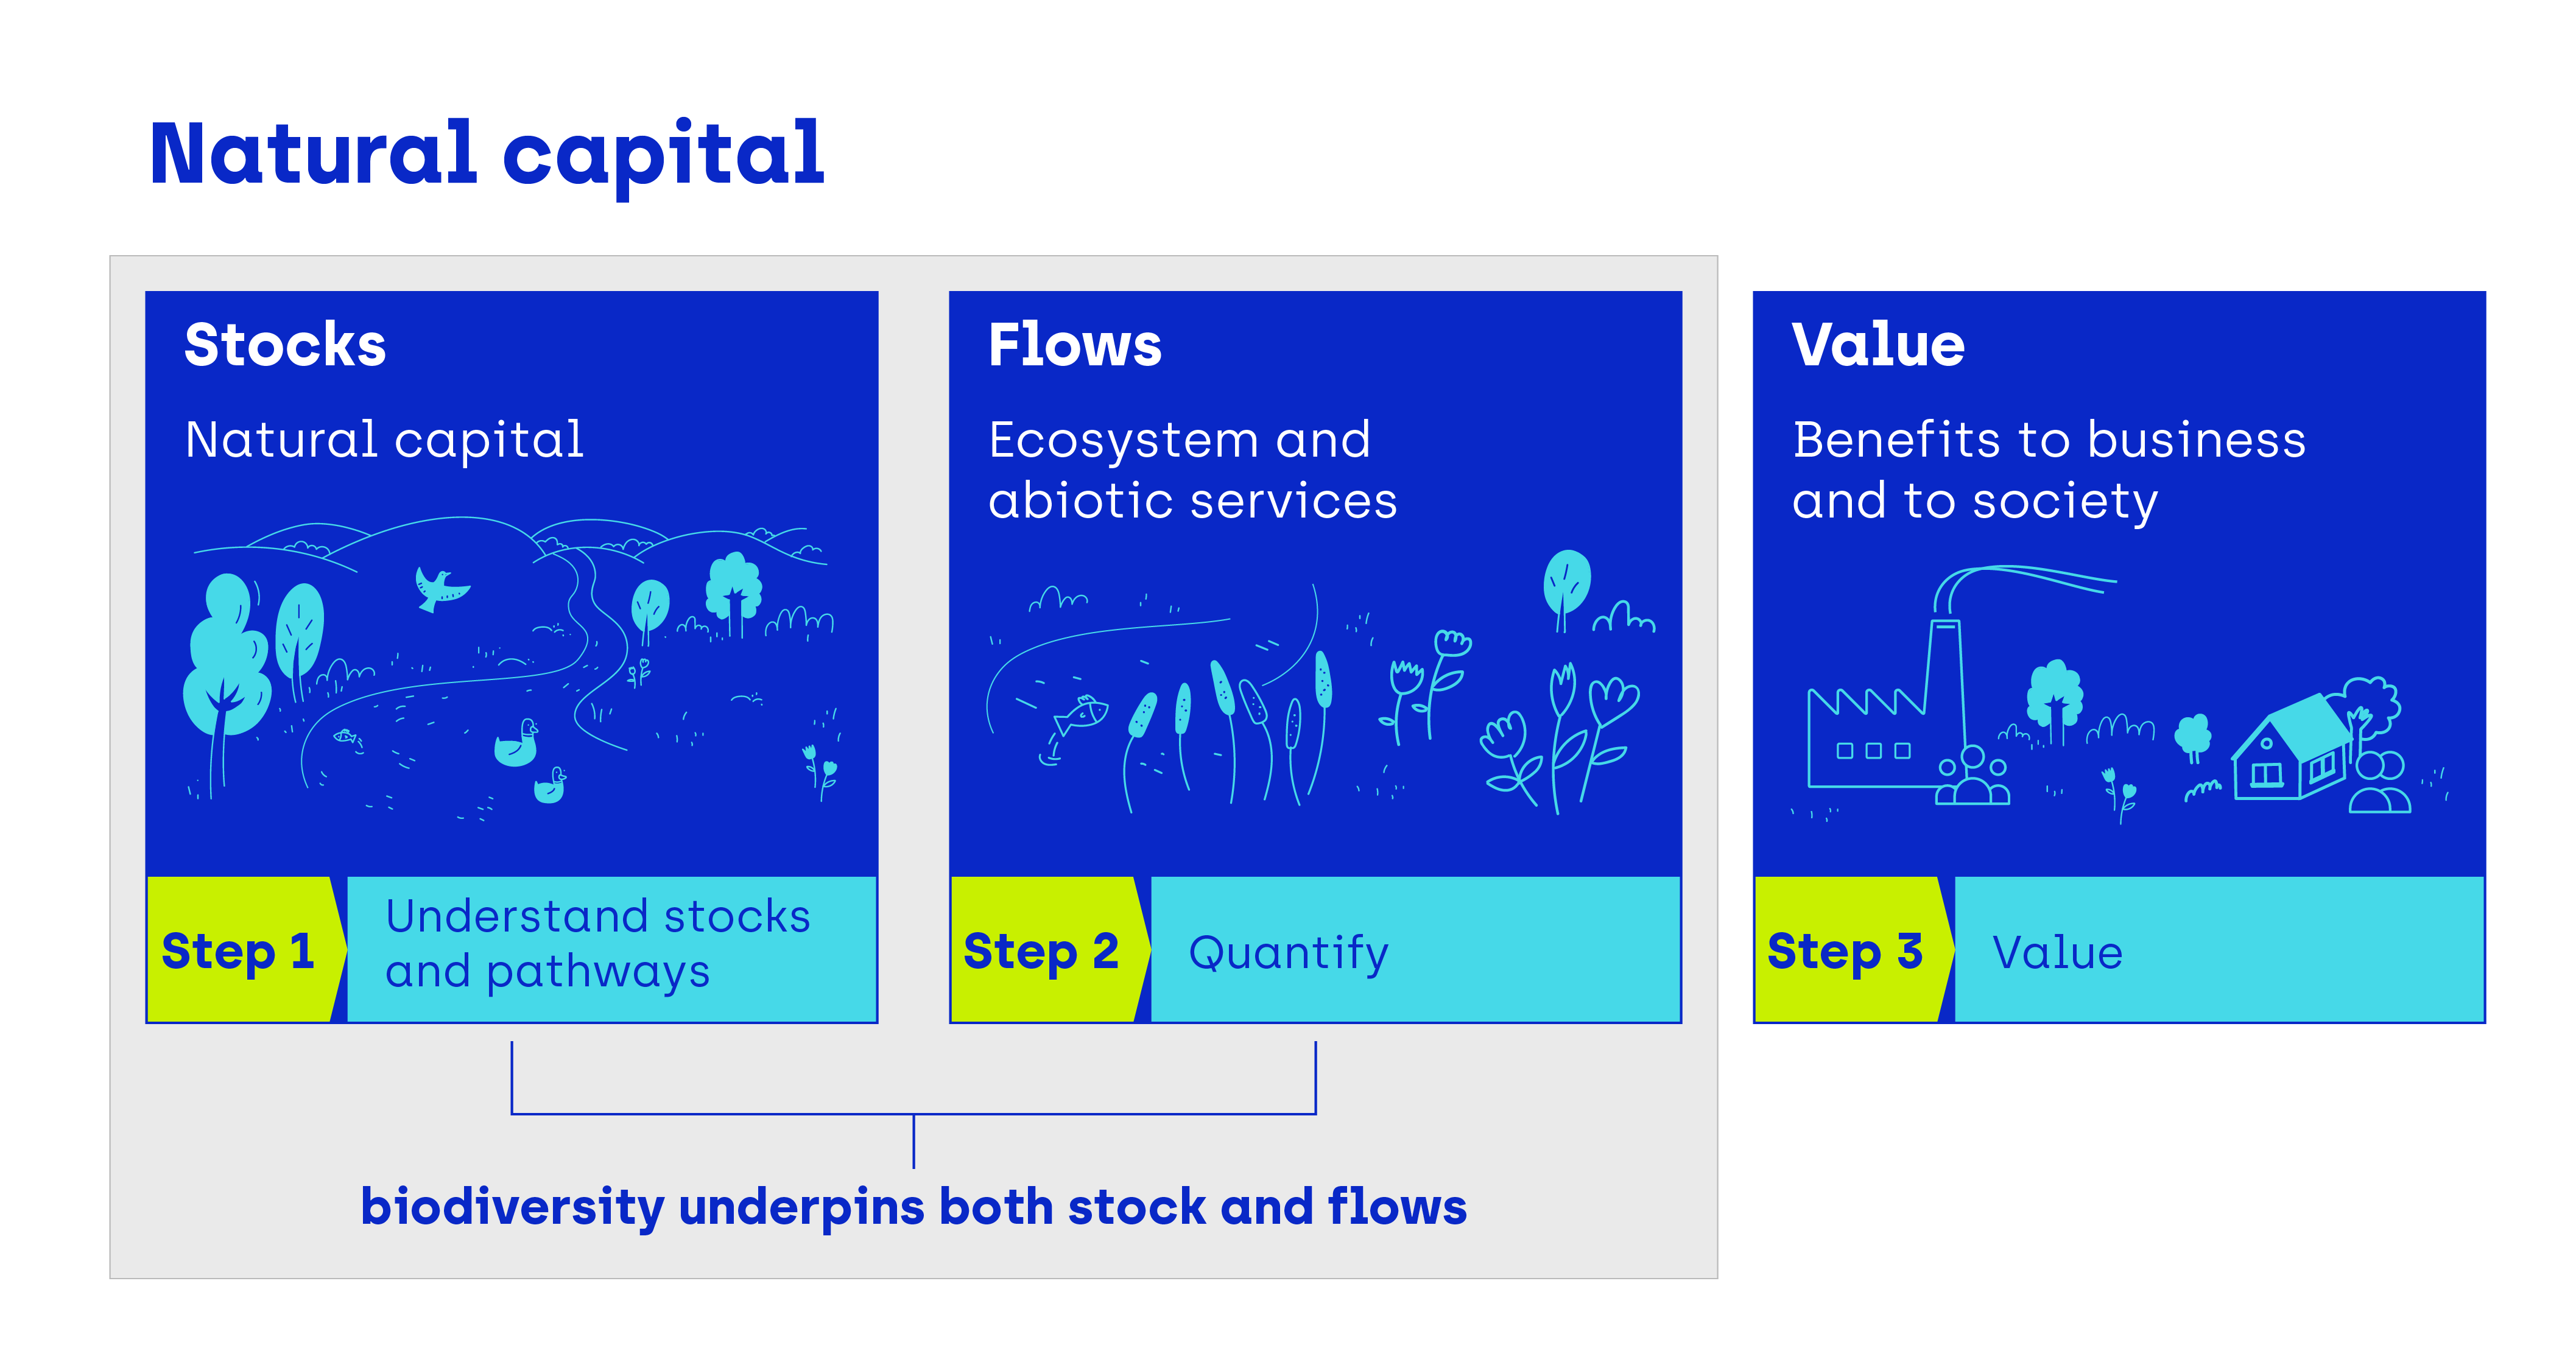 Step 1 - understand stocks and pathways, Step 2 - quantify, step 3 - value